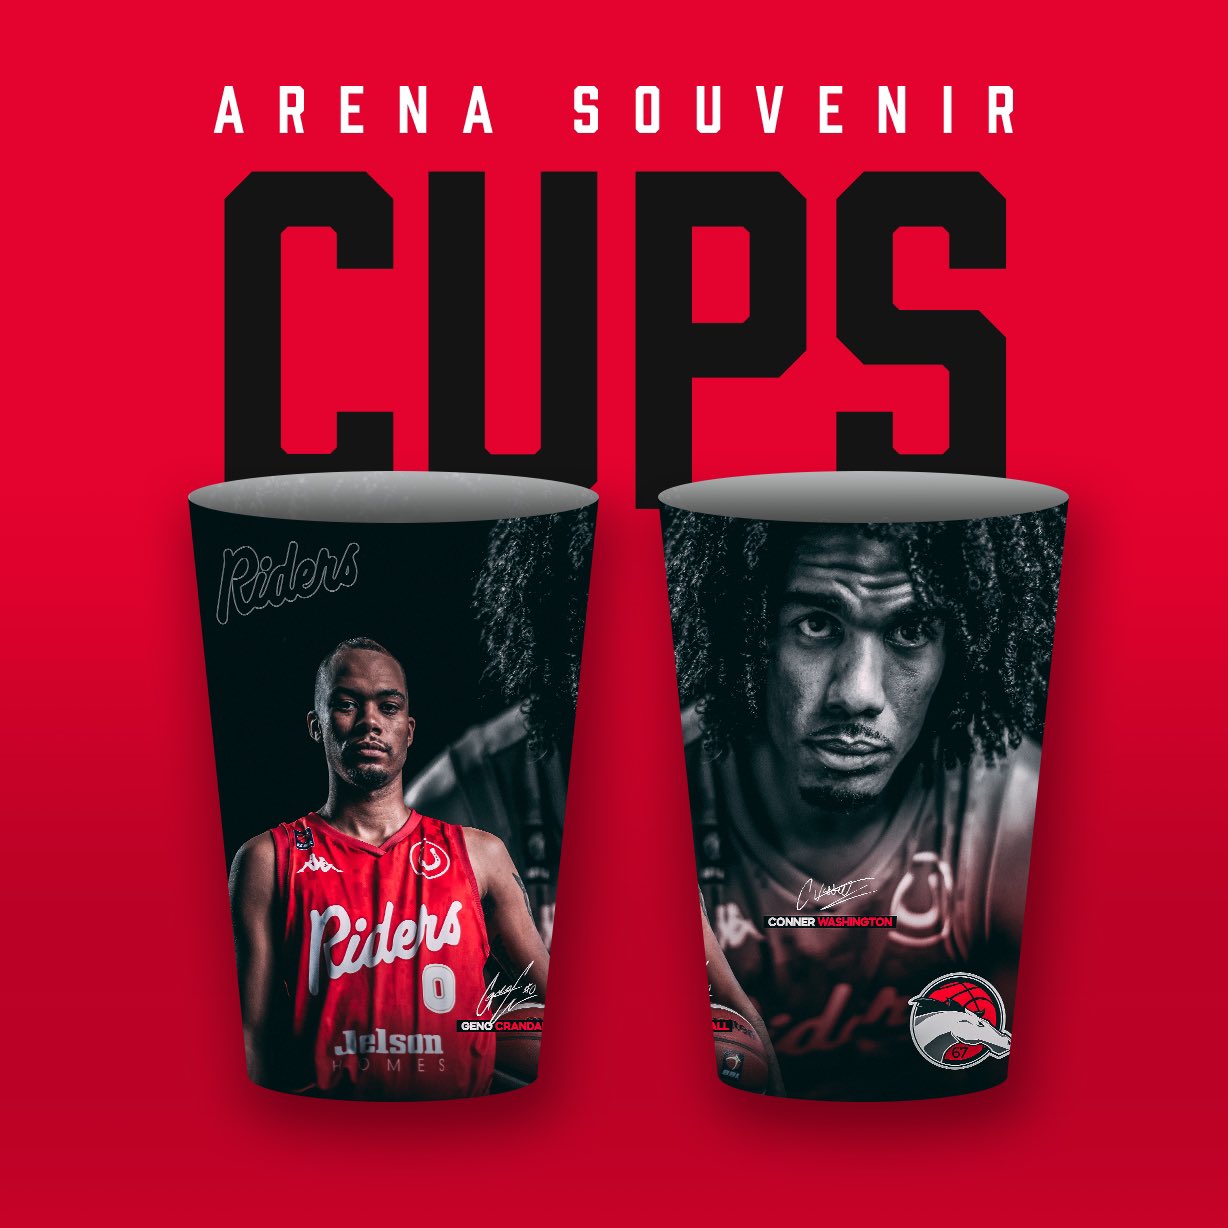 Riders Cup